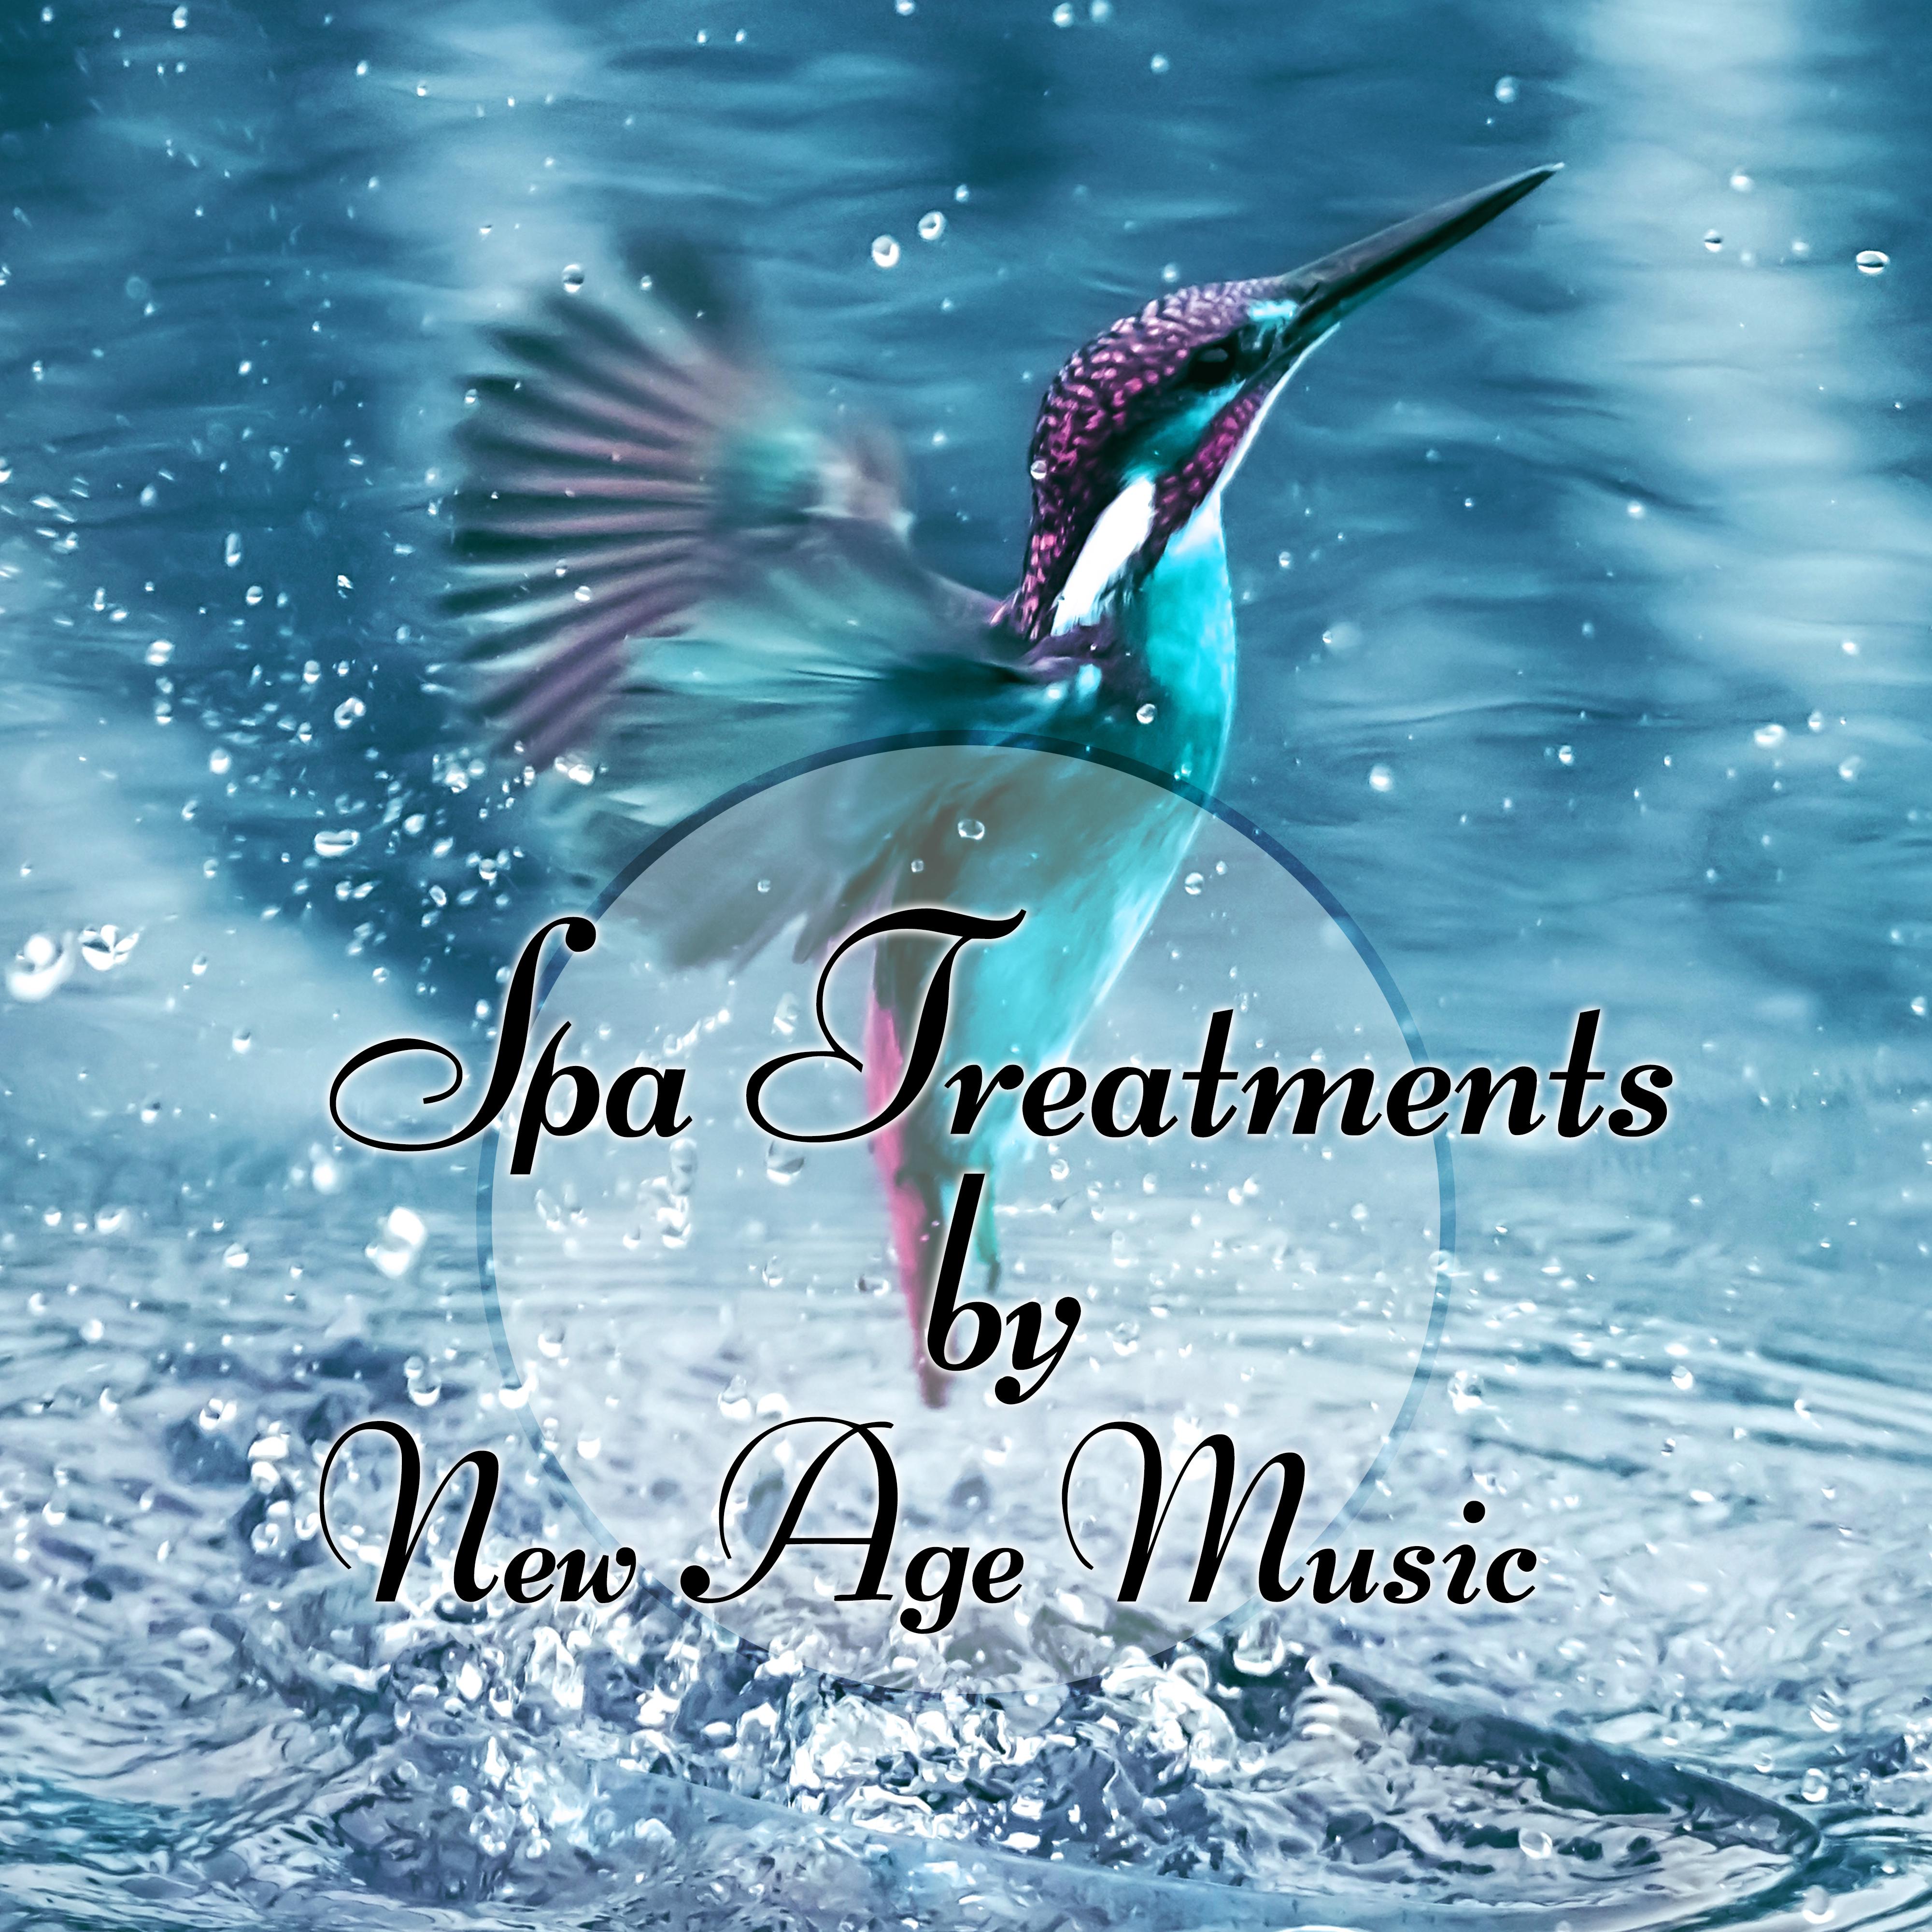 Spa Treatments by New Age Music - Hydro Energy Body Massage, First Class, Aromatherapy, Wellness